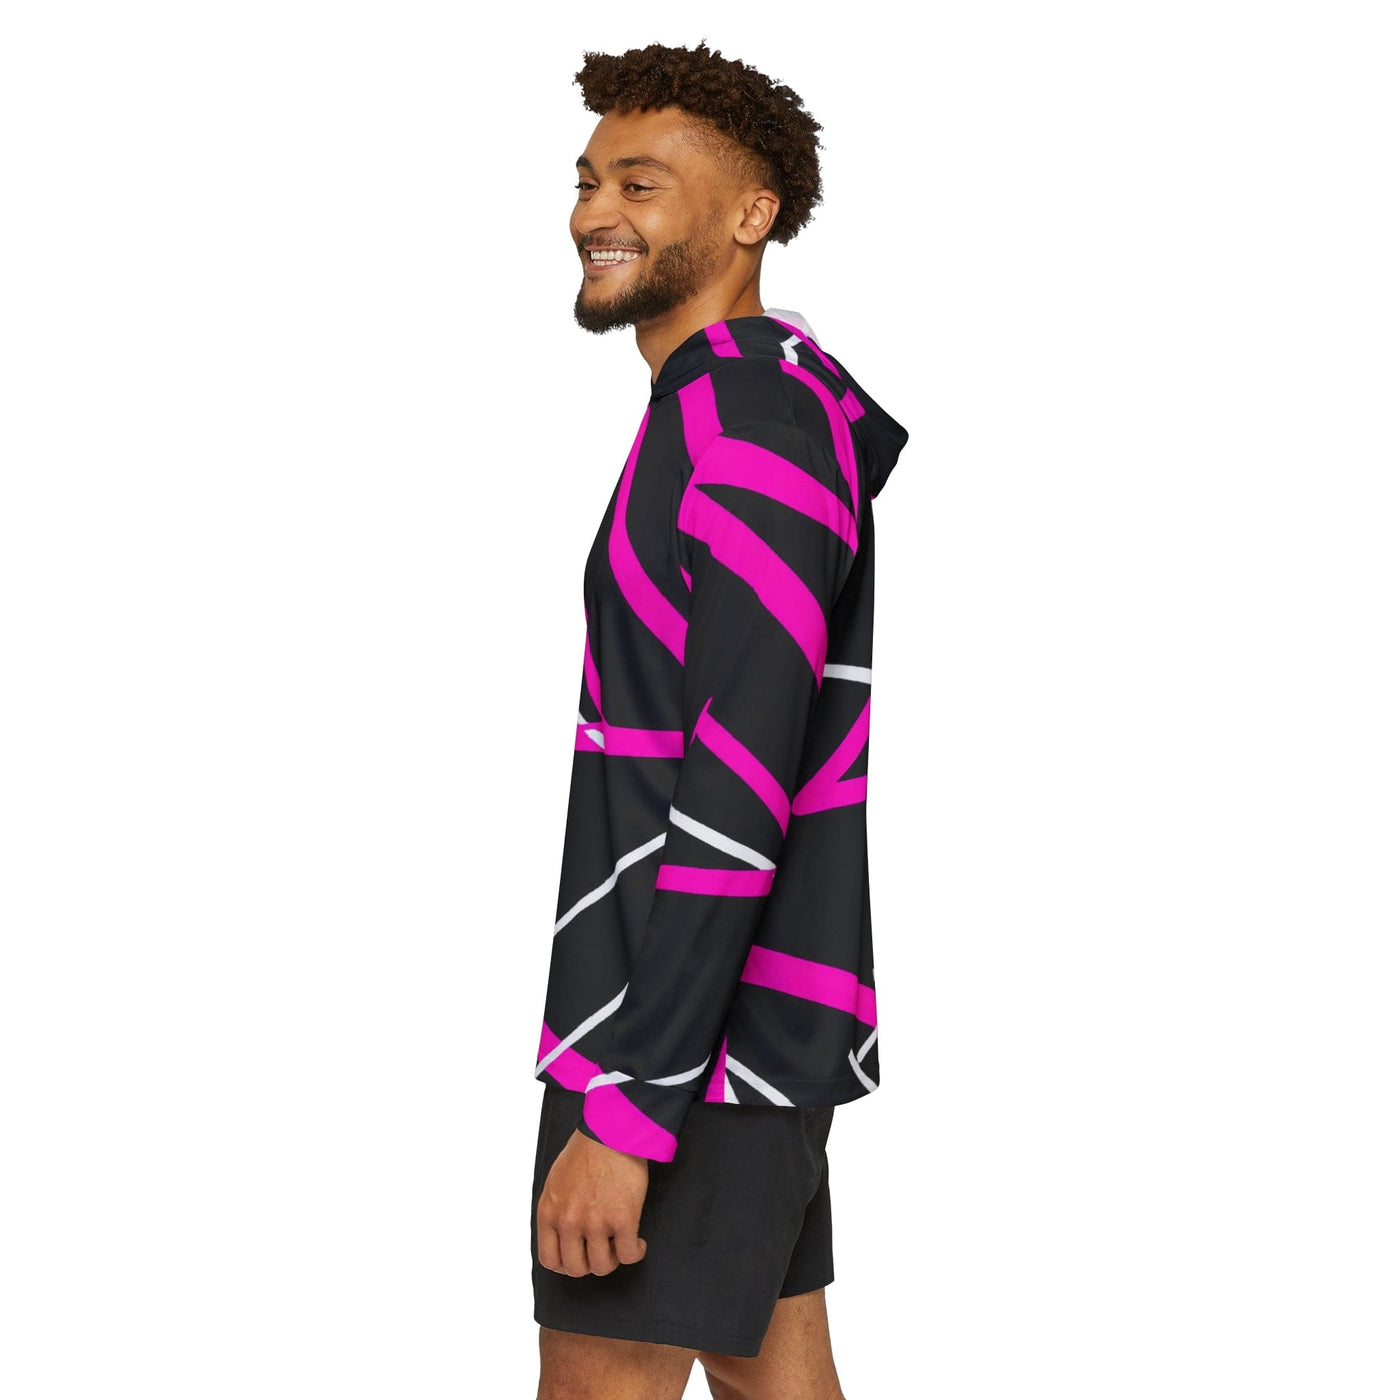 Mens Sports Graphic Hoodie Black And Pink Pattern - All Over Prints